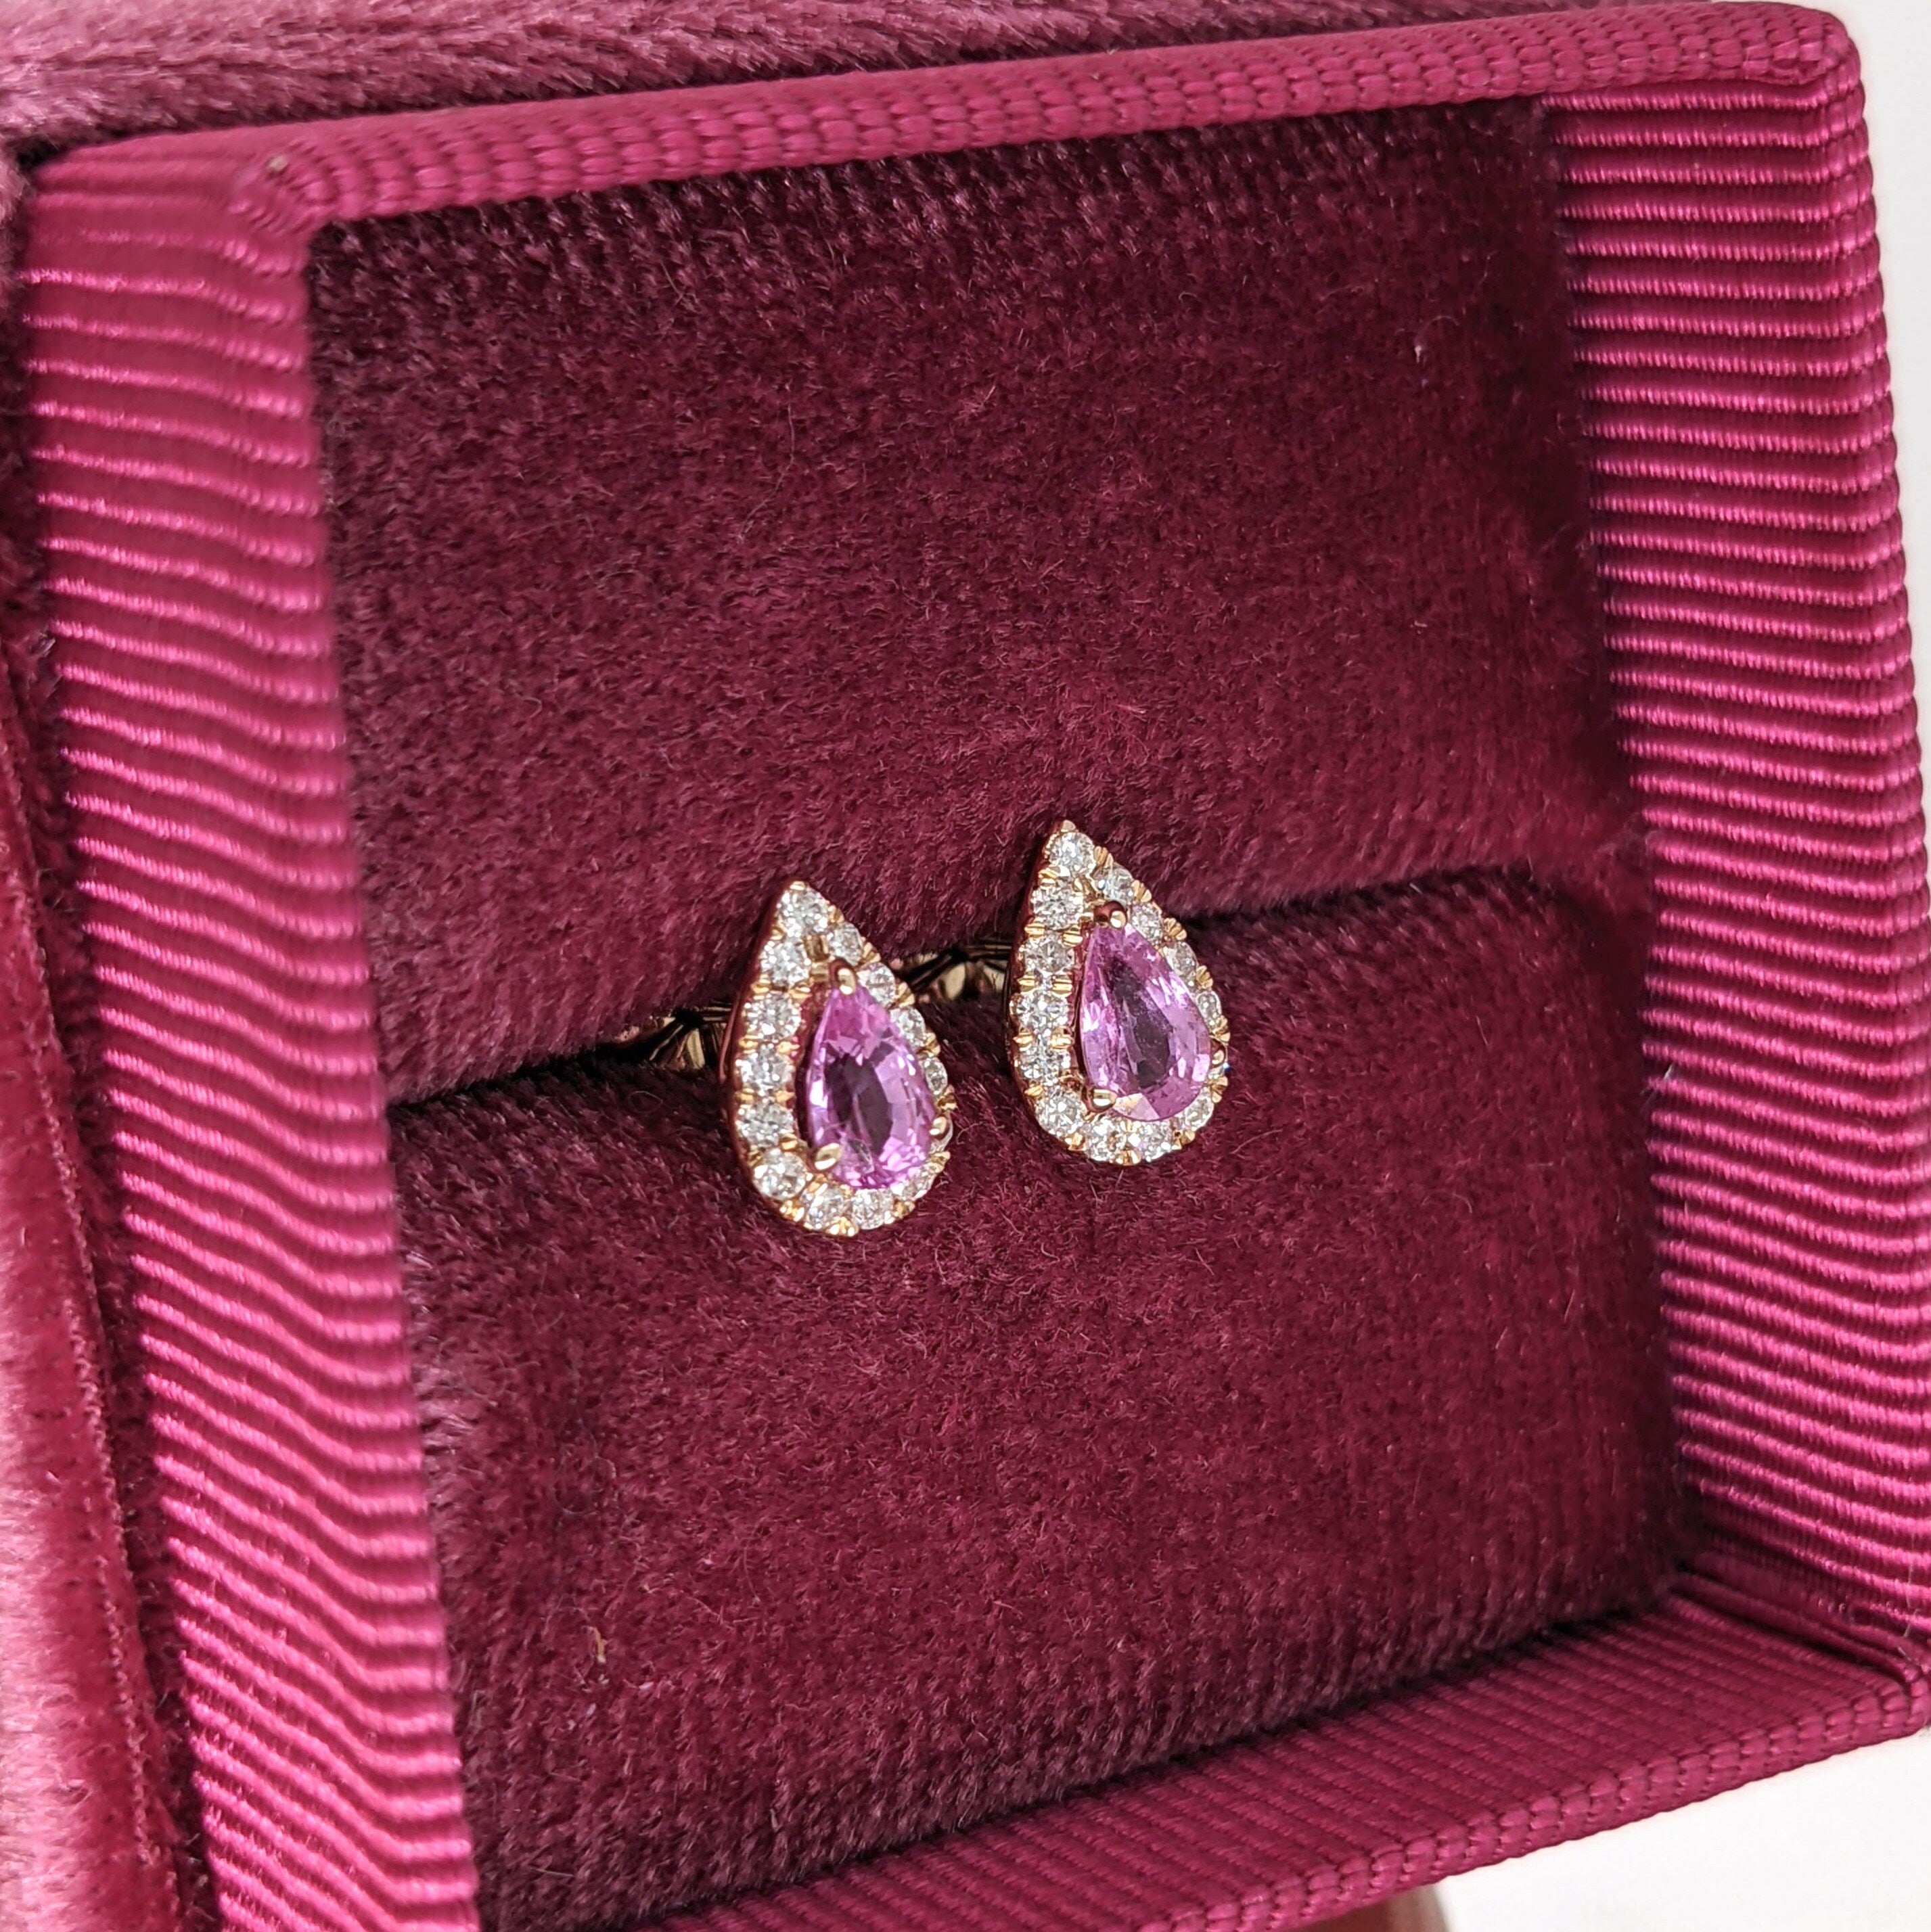 Stud Earrings-Petite Baby Pink Sapphire Earring Studs in 14k Yellow Gold with Diamond Halo | September Birthstone | Secure Push Backs | Pear Shape 5x3mm - NNJGemstones